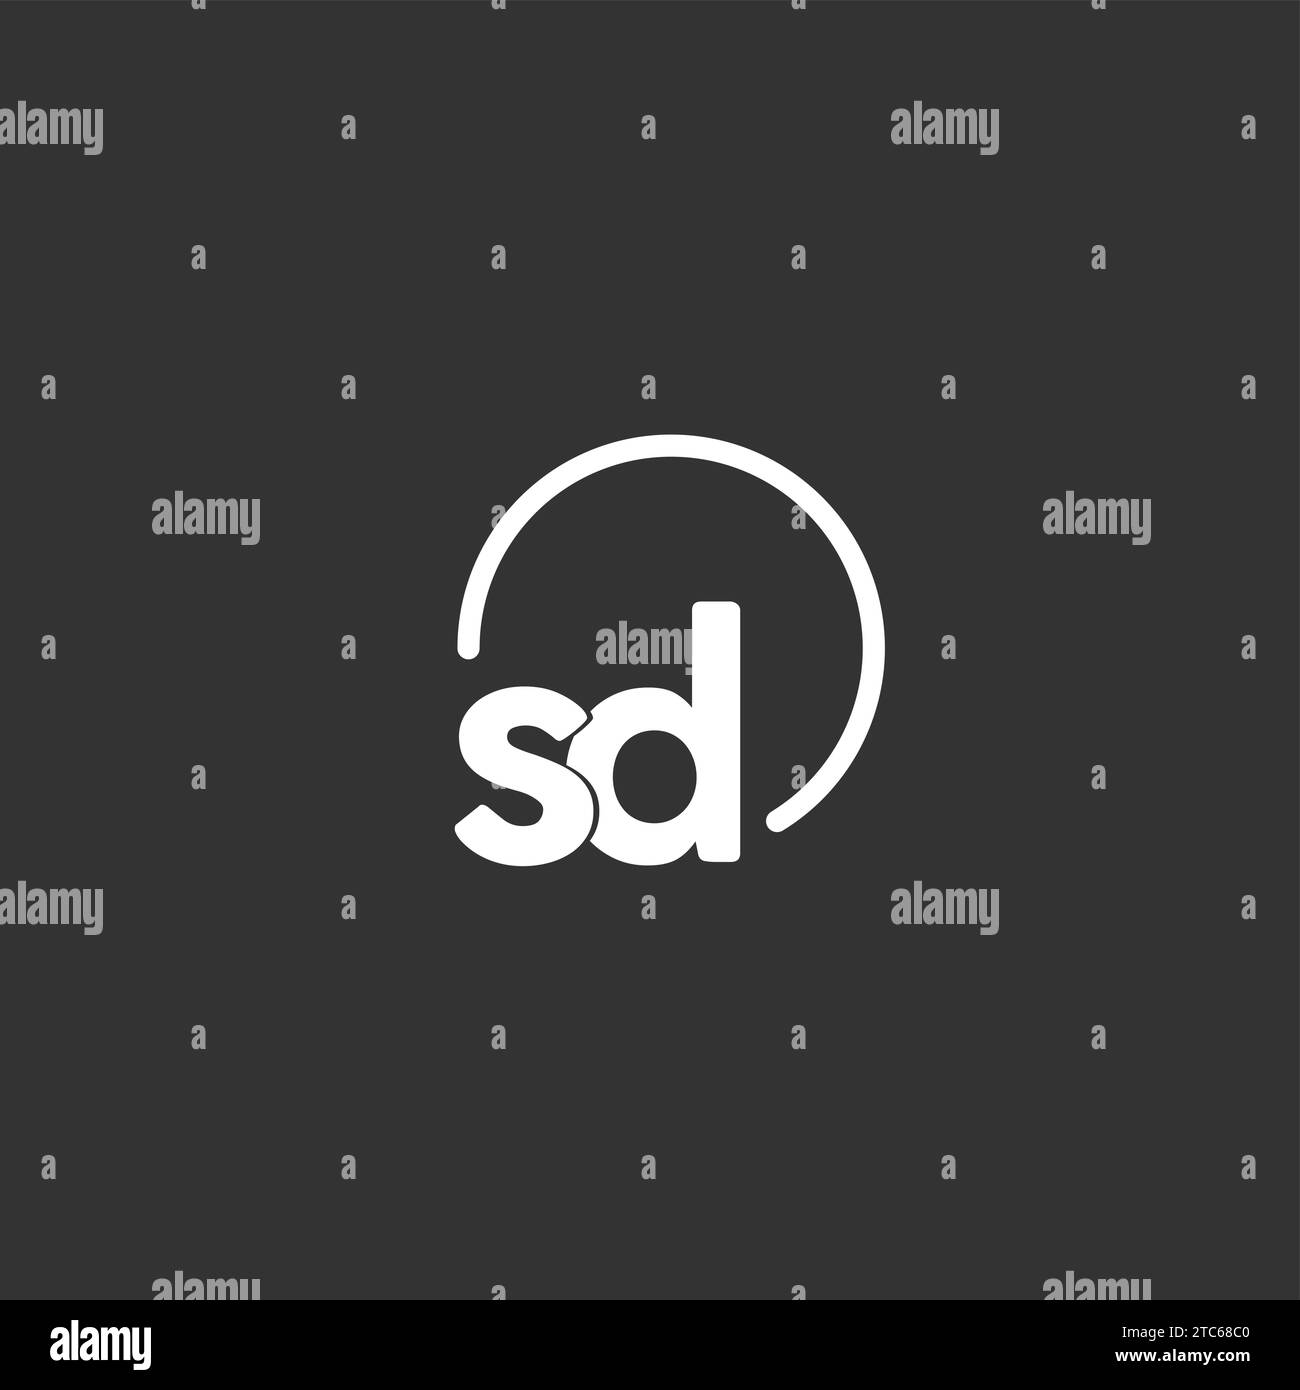 SD initial logo with rounded circle vector graphic Stock Vector